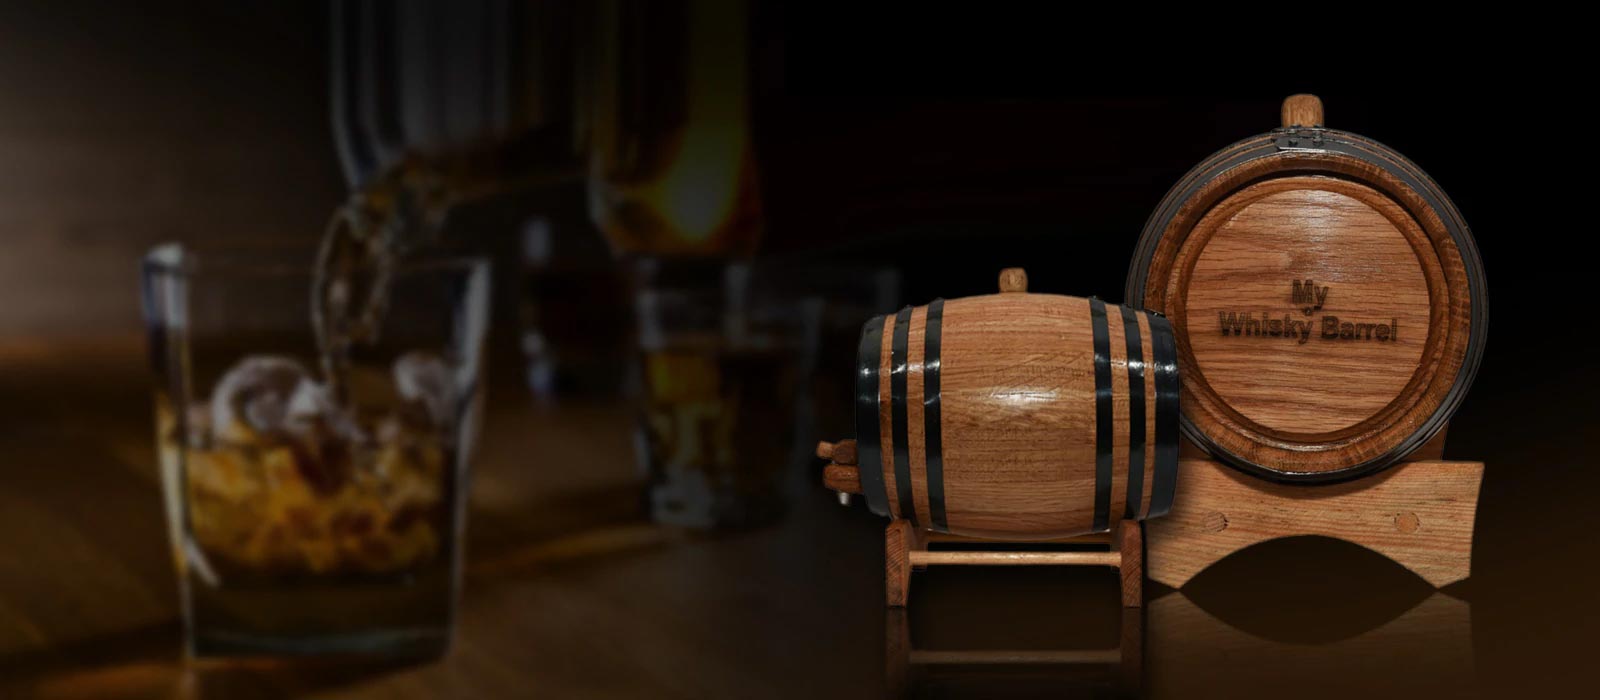 my-whisky-barrel-American-oak-wood-for-smooth-whiskey